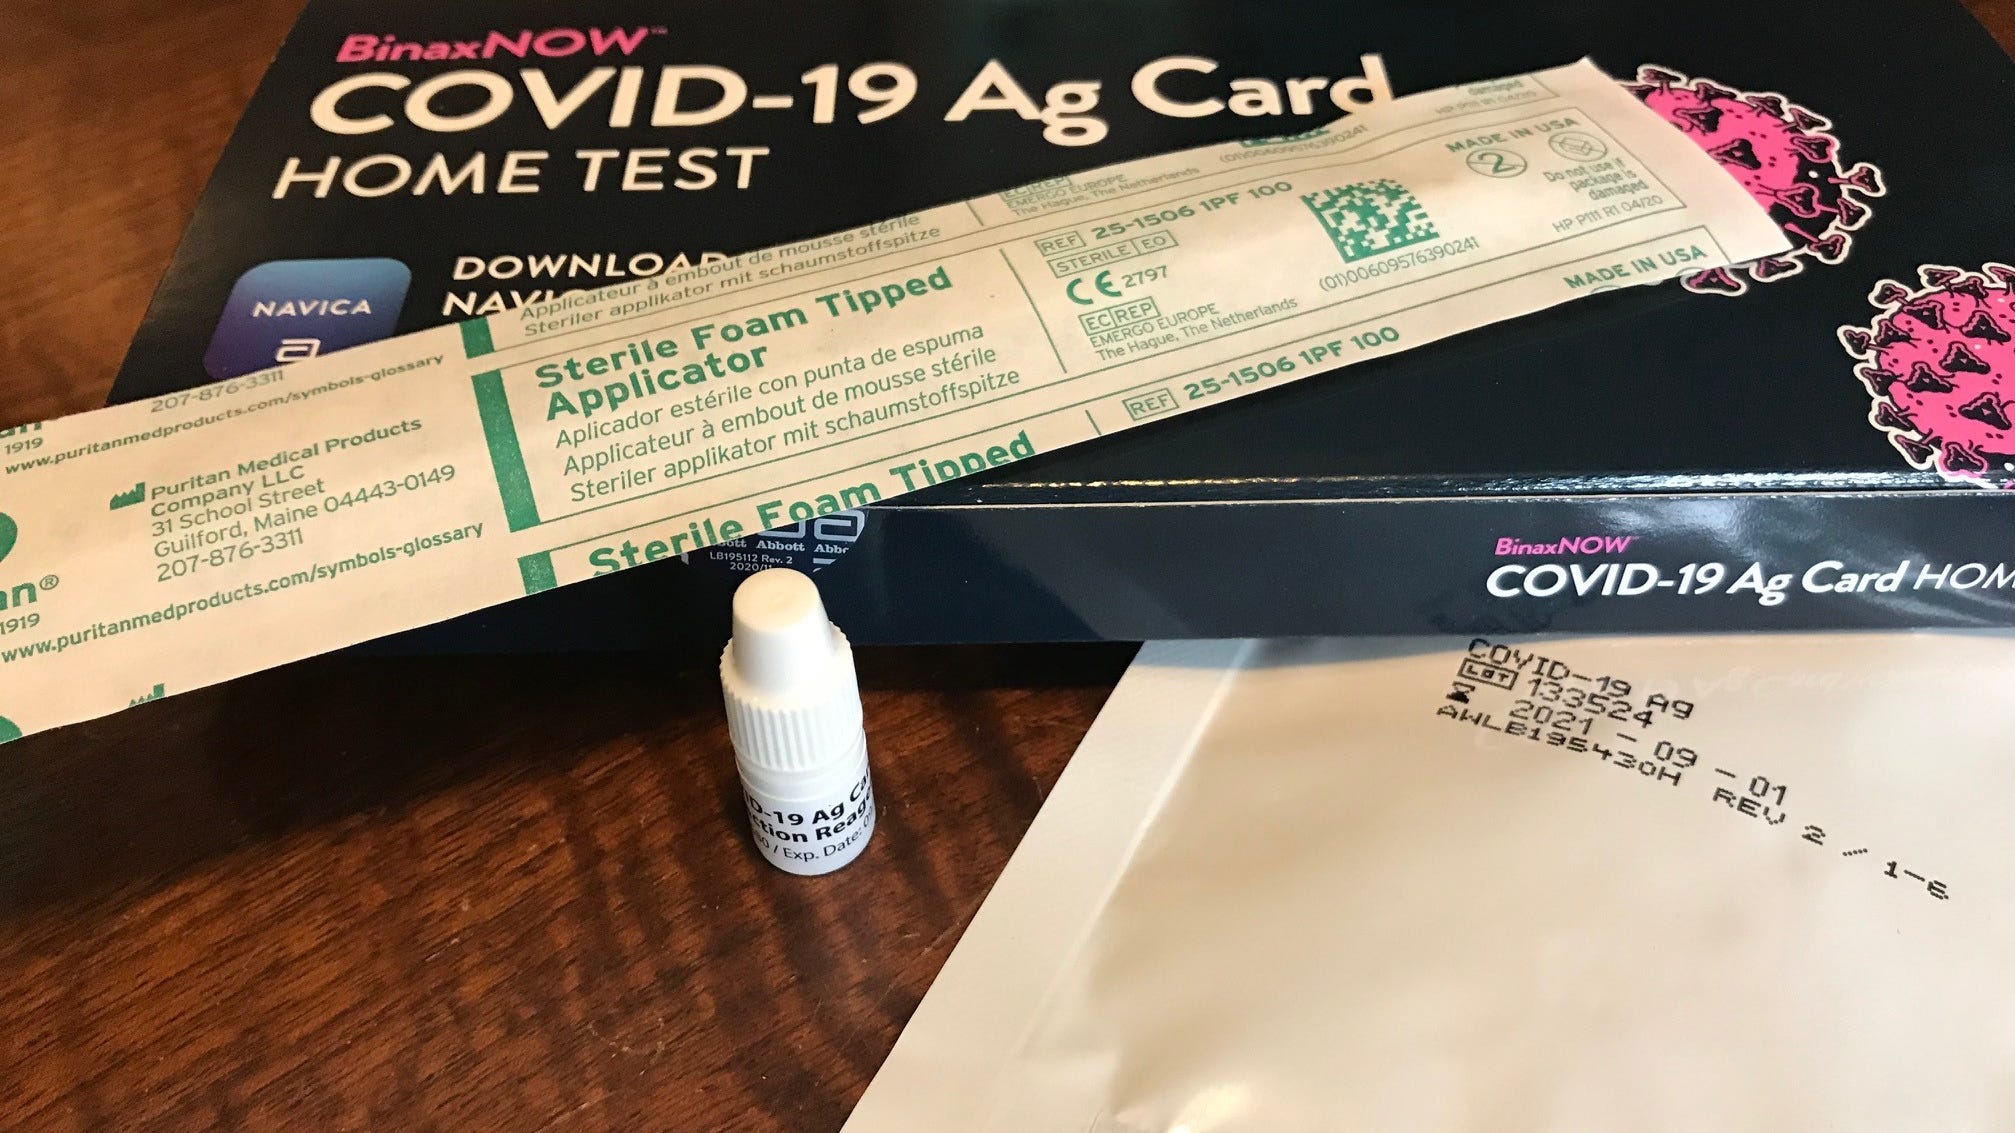 Free, athome COVID19 test kits 'one more tool' in fight